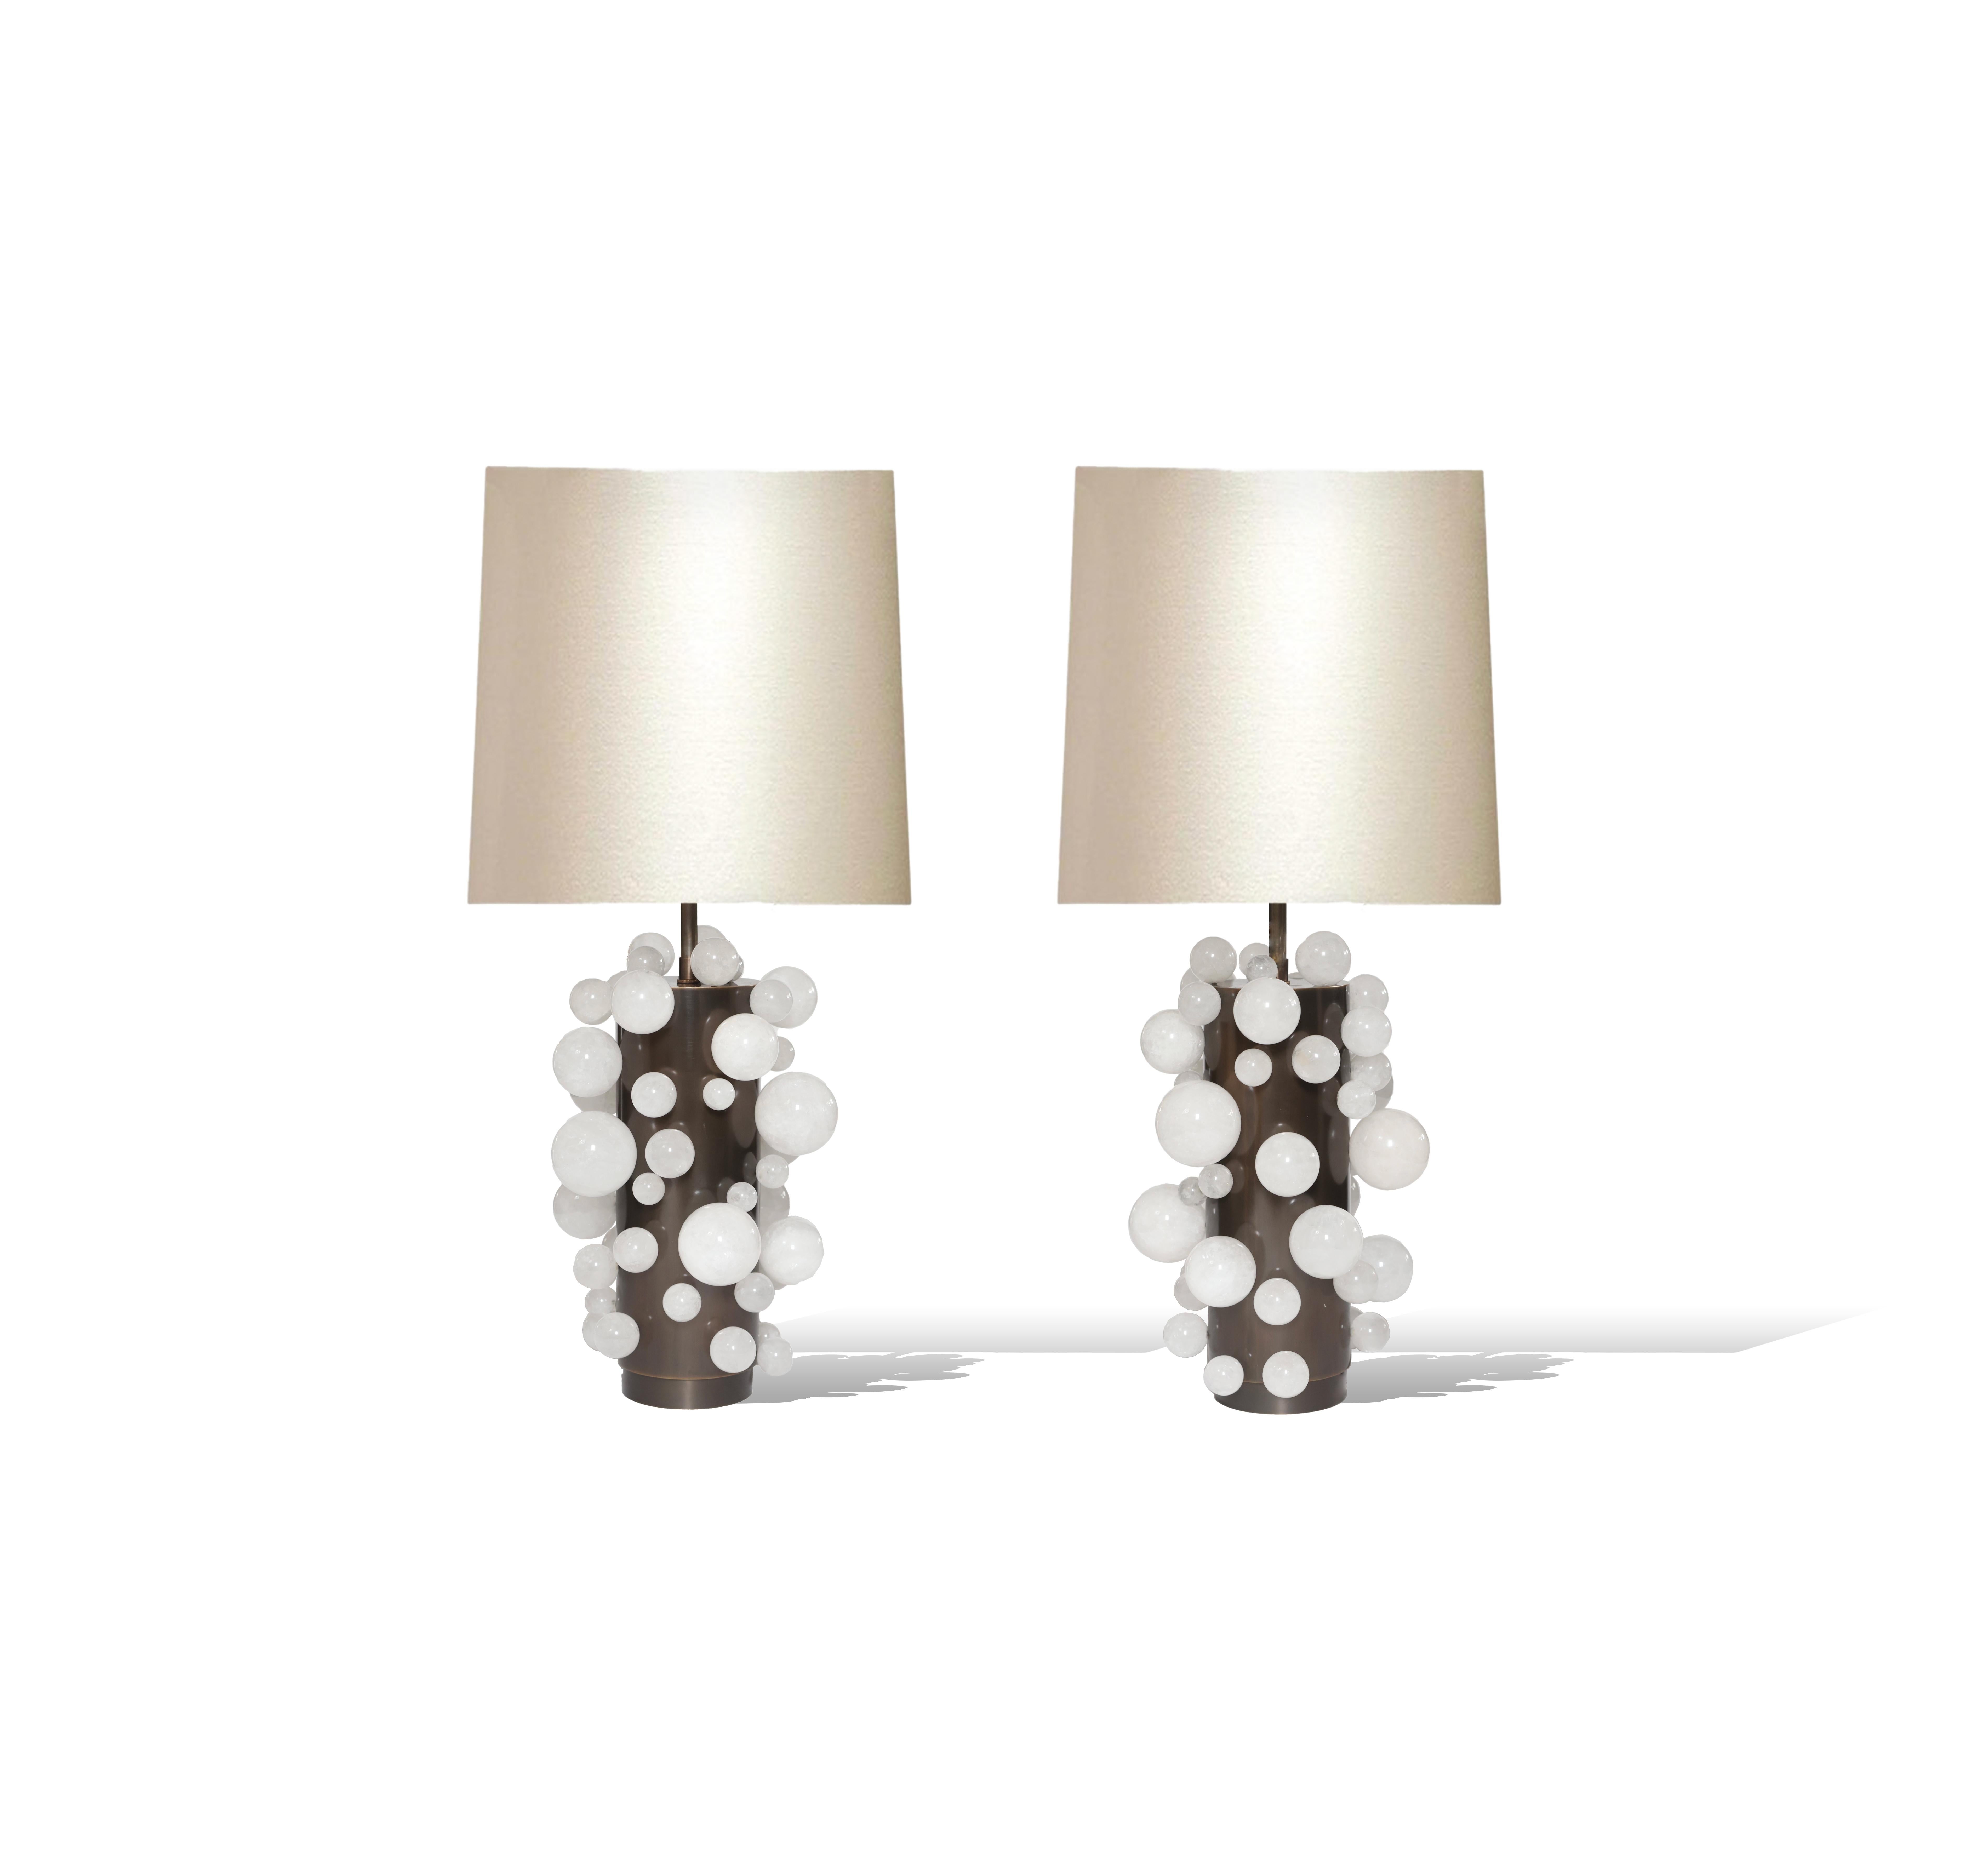 A pair of luxury white rock crystal quartz bulb lamps with antique brass bases, created by Phoenix Gallery, NYC.
Each lamp installed two sockets.
Lampshades not included.